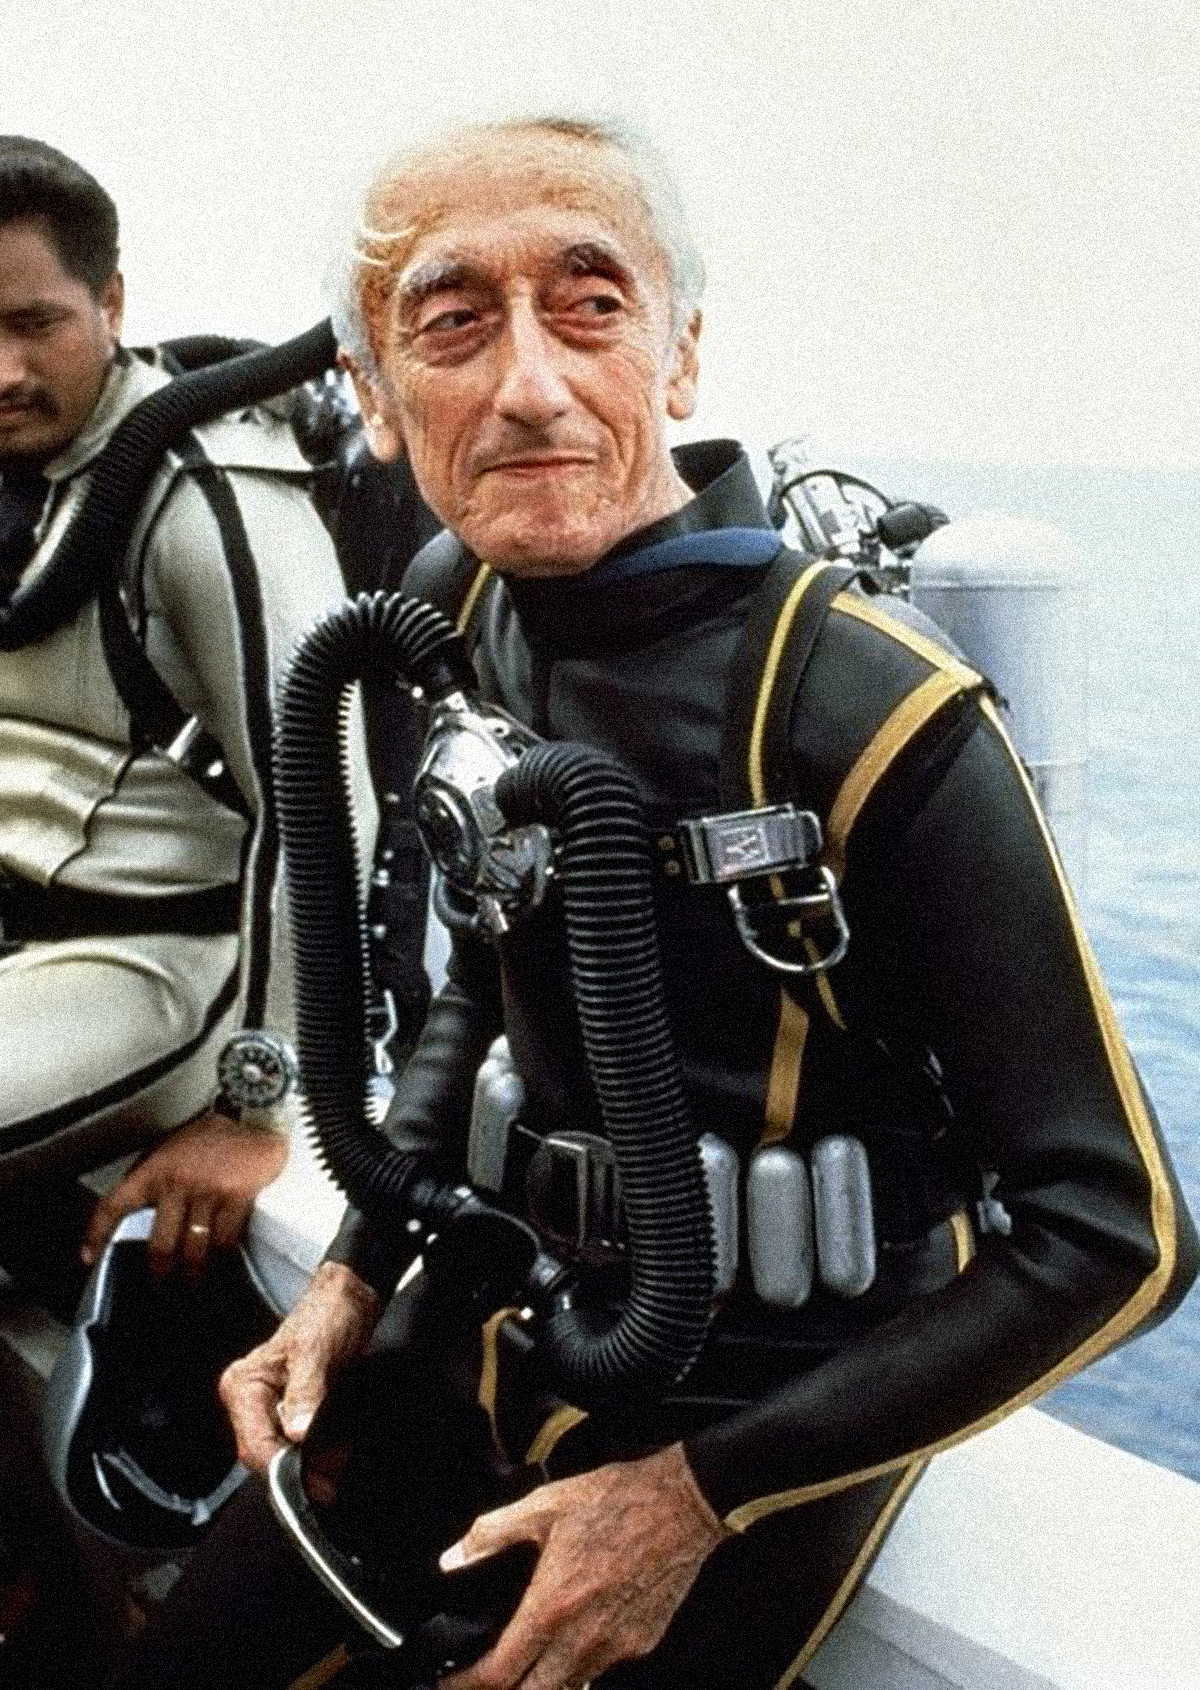 Jacques Cousteau dressed up in diving equipment
